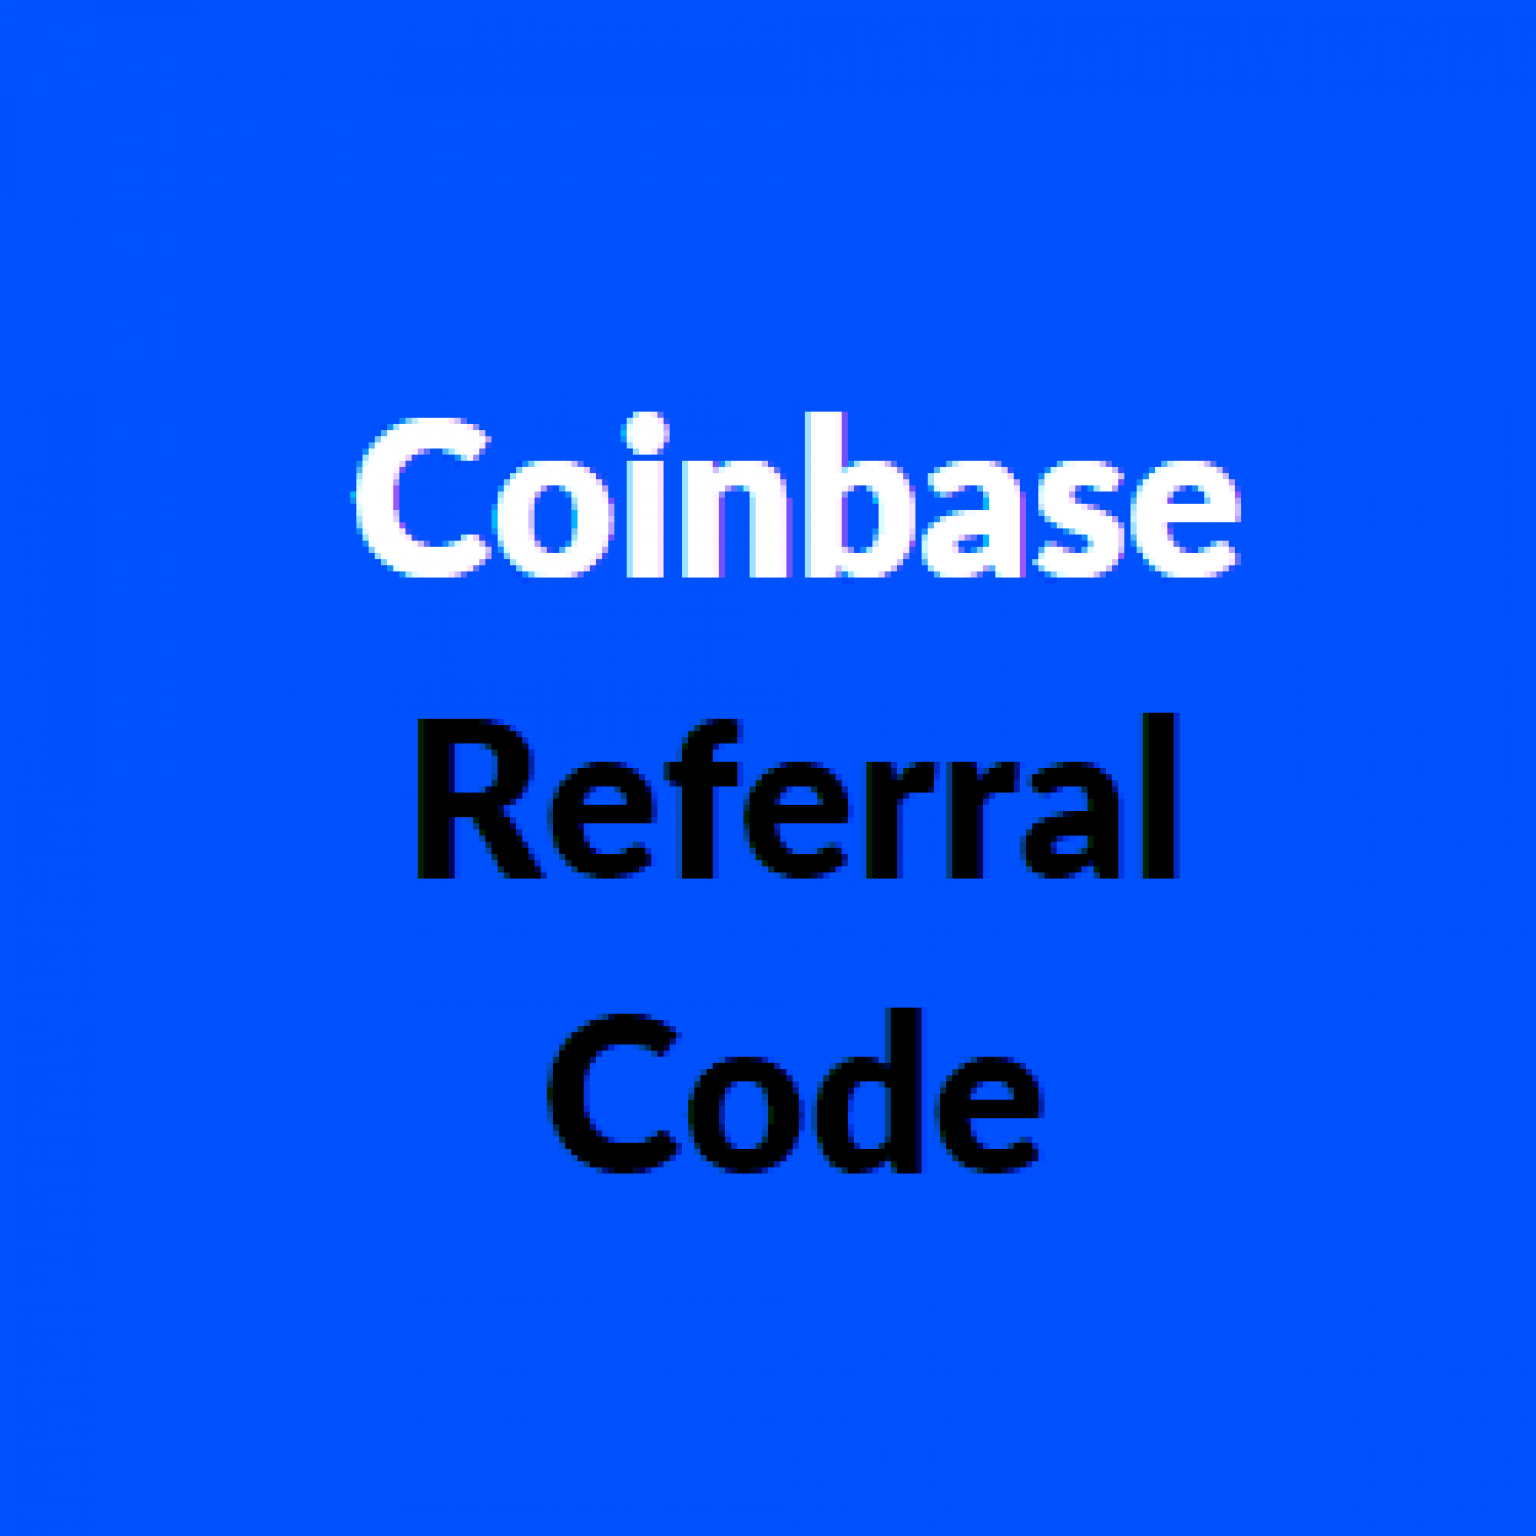 Coinbase App: Bring Friends and Get $10 | Referral Code